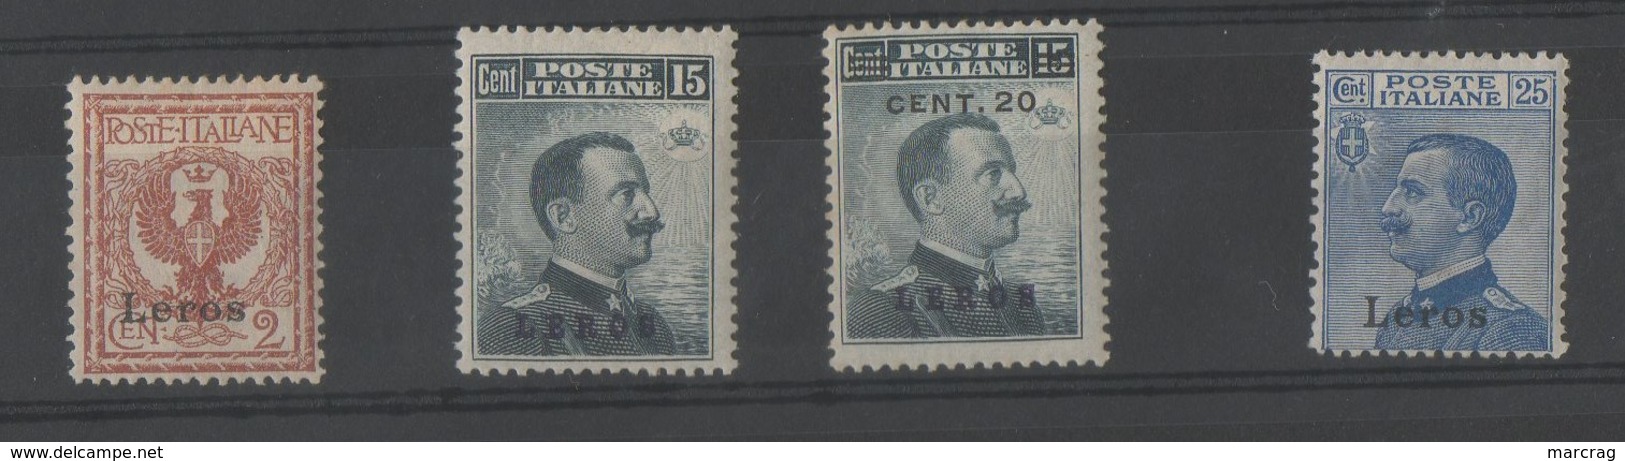 TIMBRES AVEC CHARNIERES OCCUPATION ITALIENNE - Aegean (Lero)